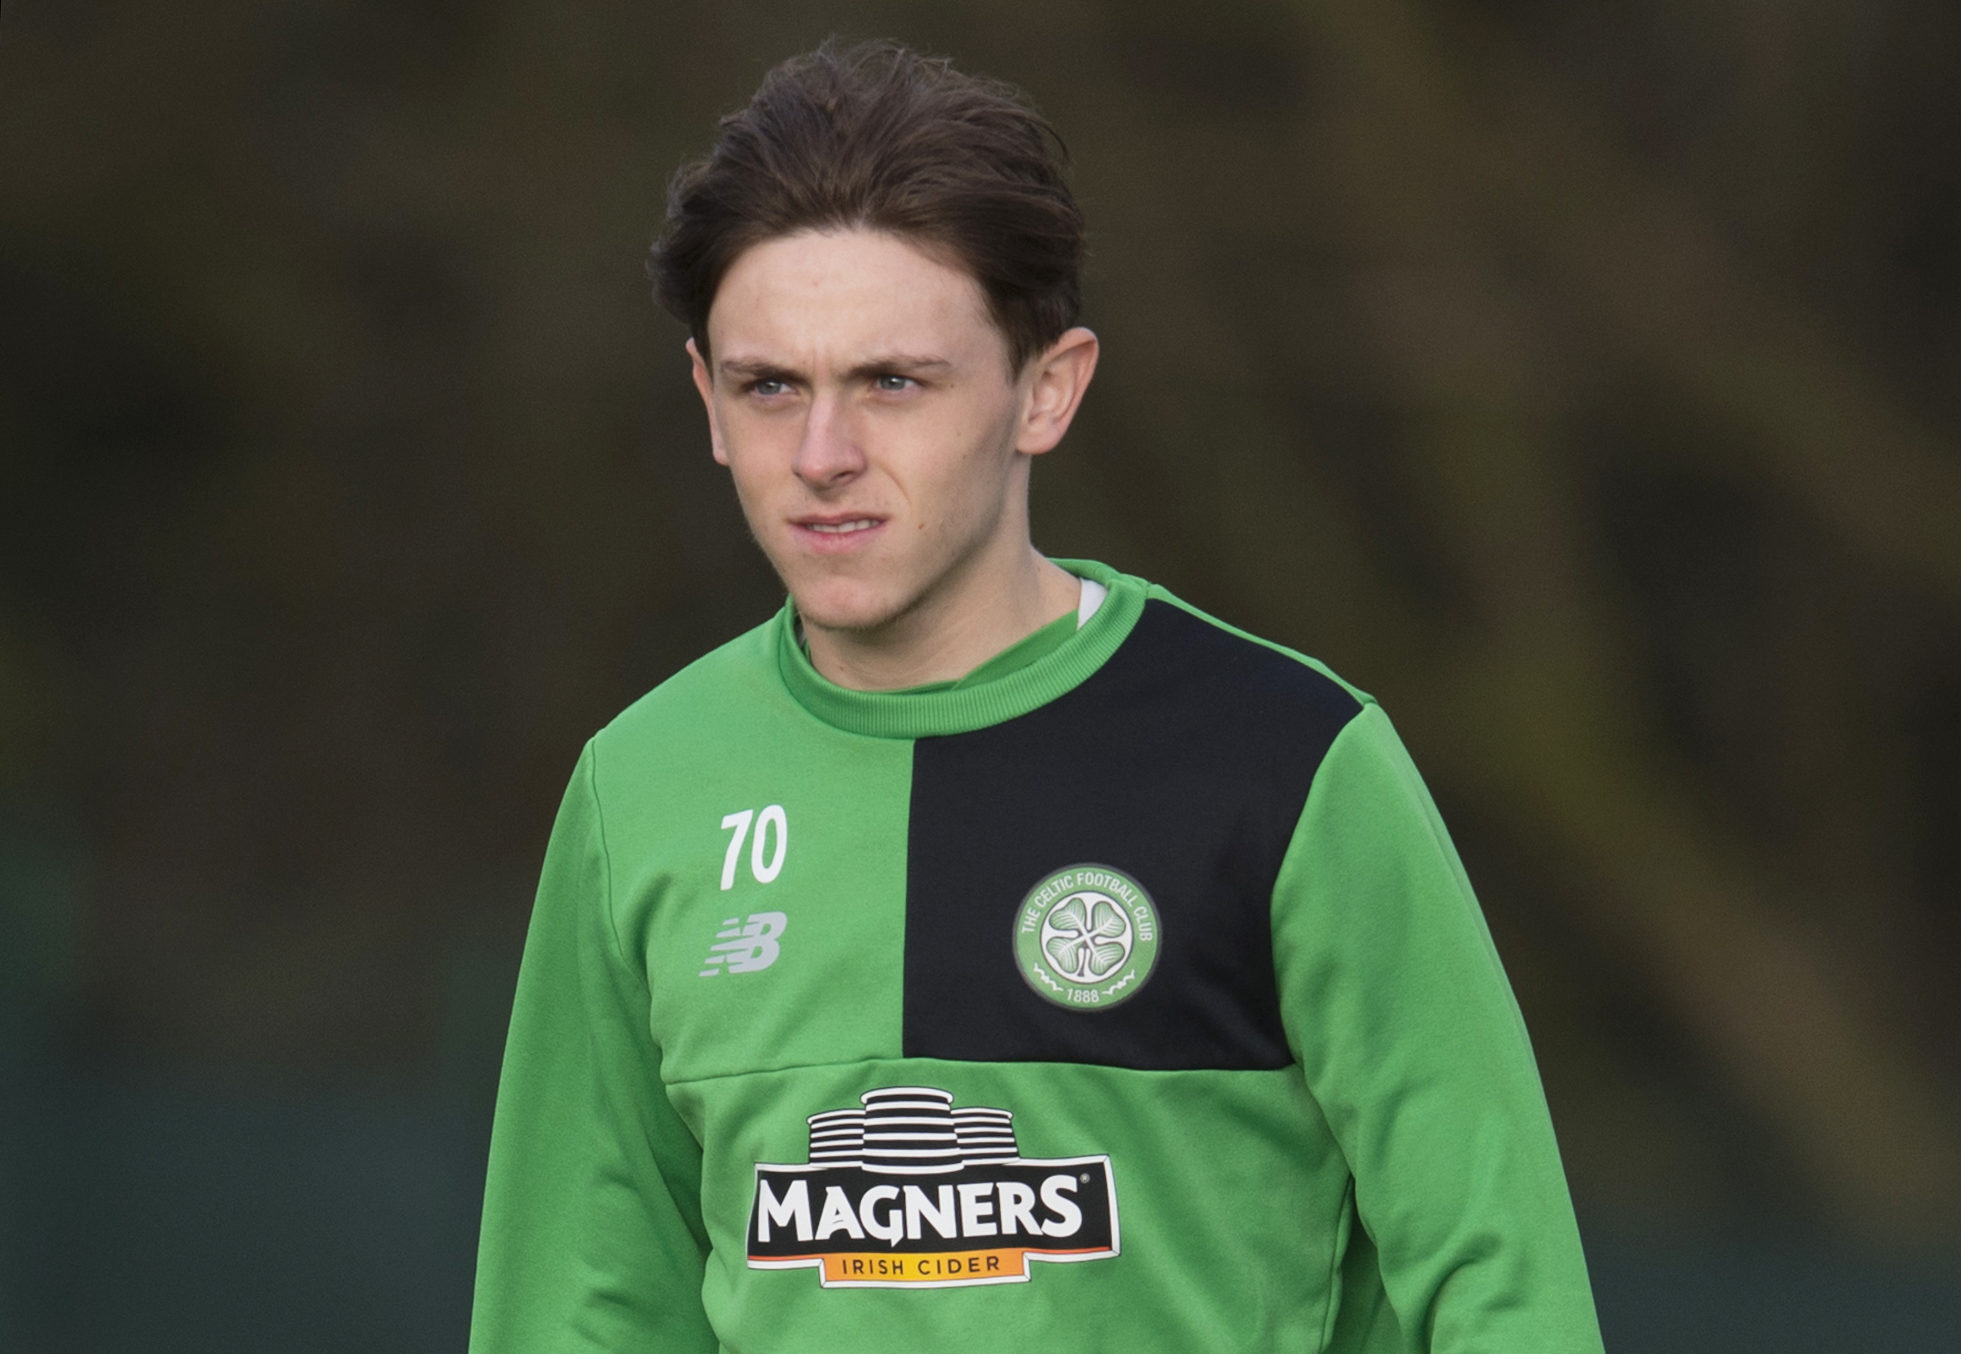 Broque Watson started as a trainee at Celtic.